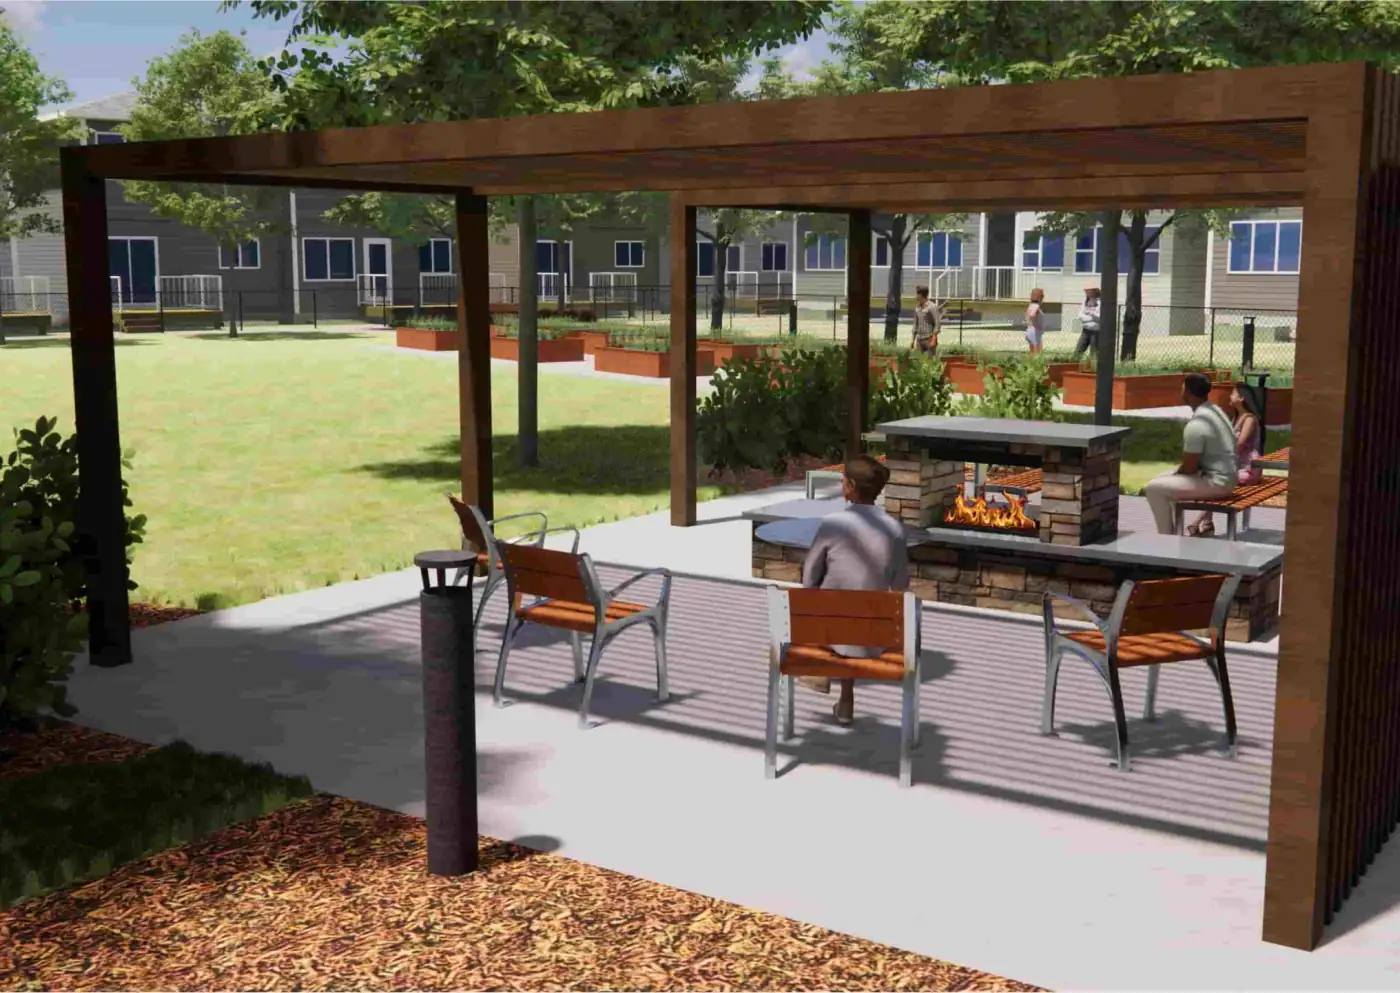 Shared BBQ amenity area with well-maintained grilling stations, outdoor seating, and a friendly atmosphere, perfect for communal gatherings and enjoyable barbecues.